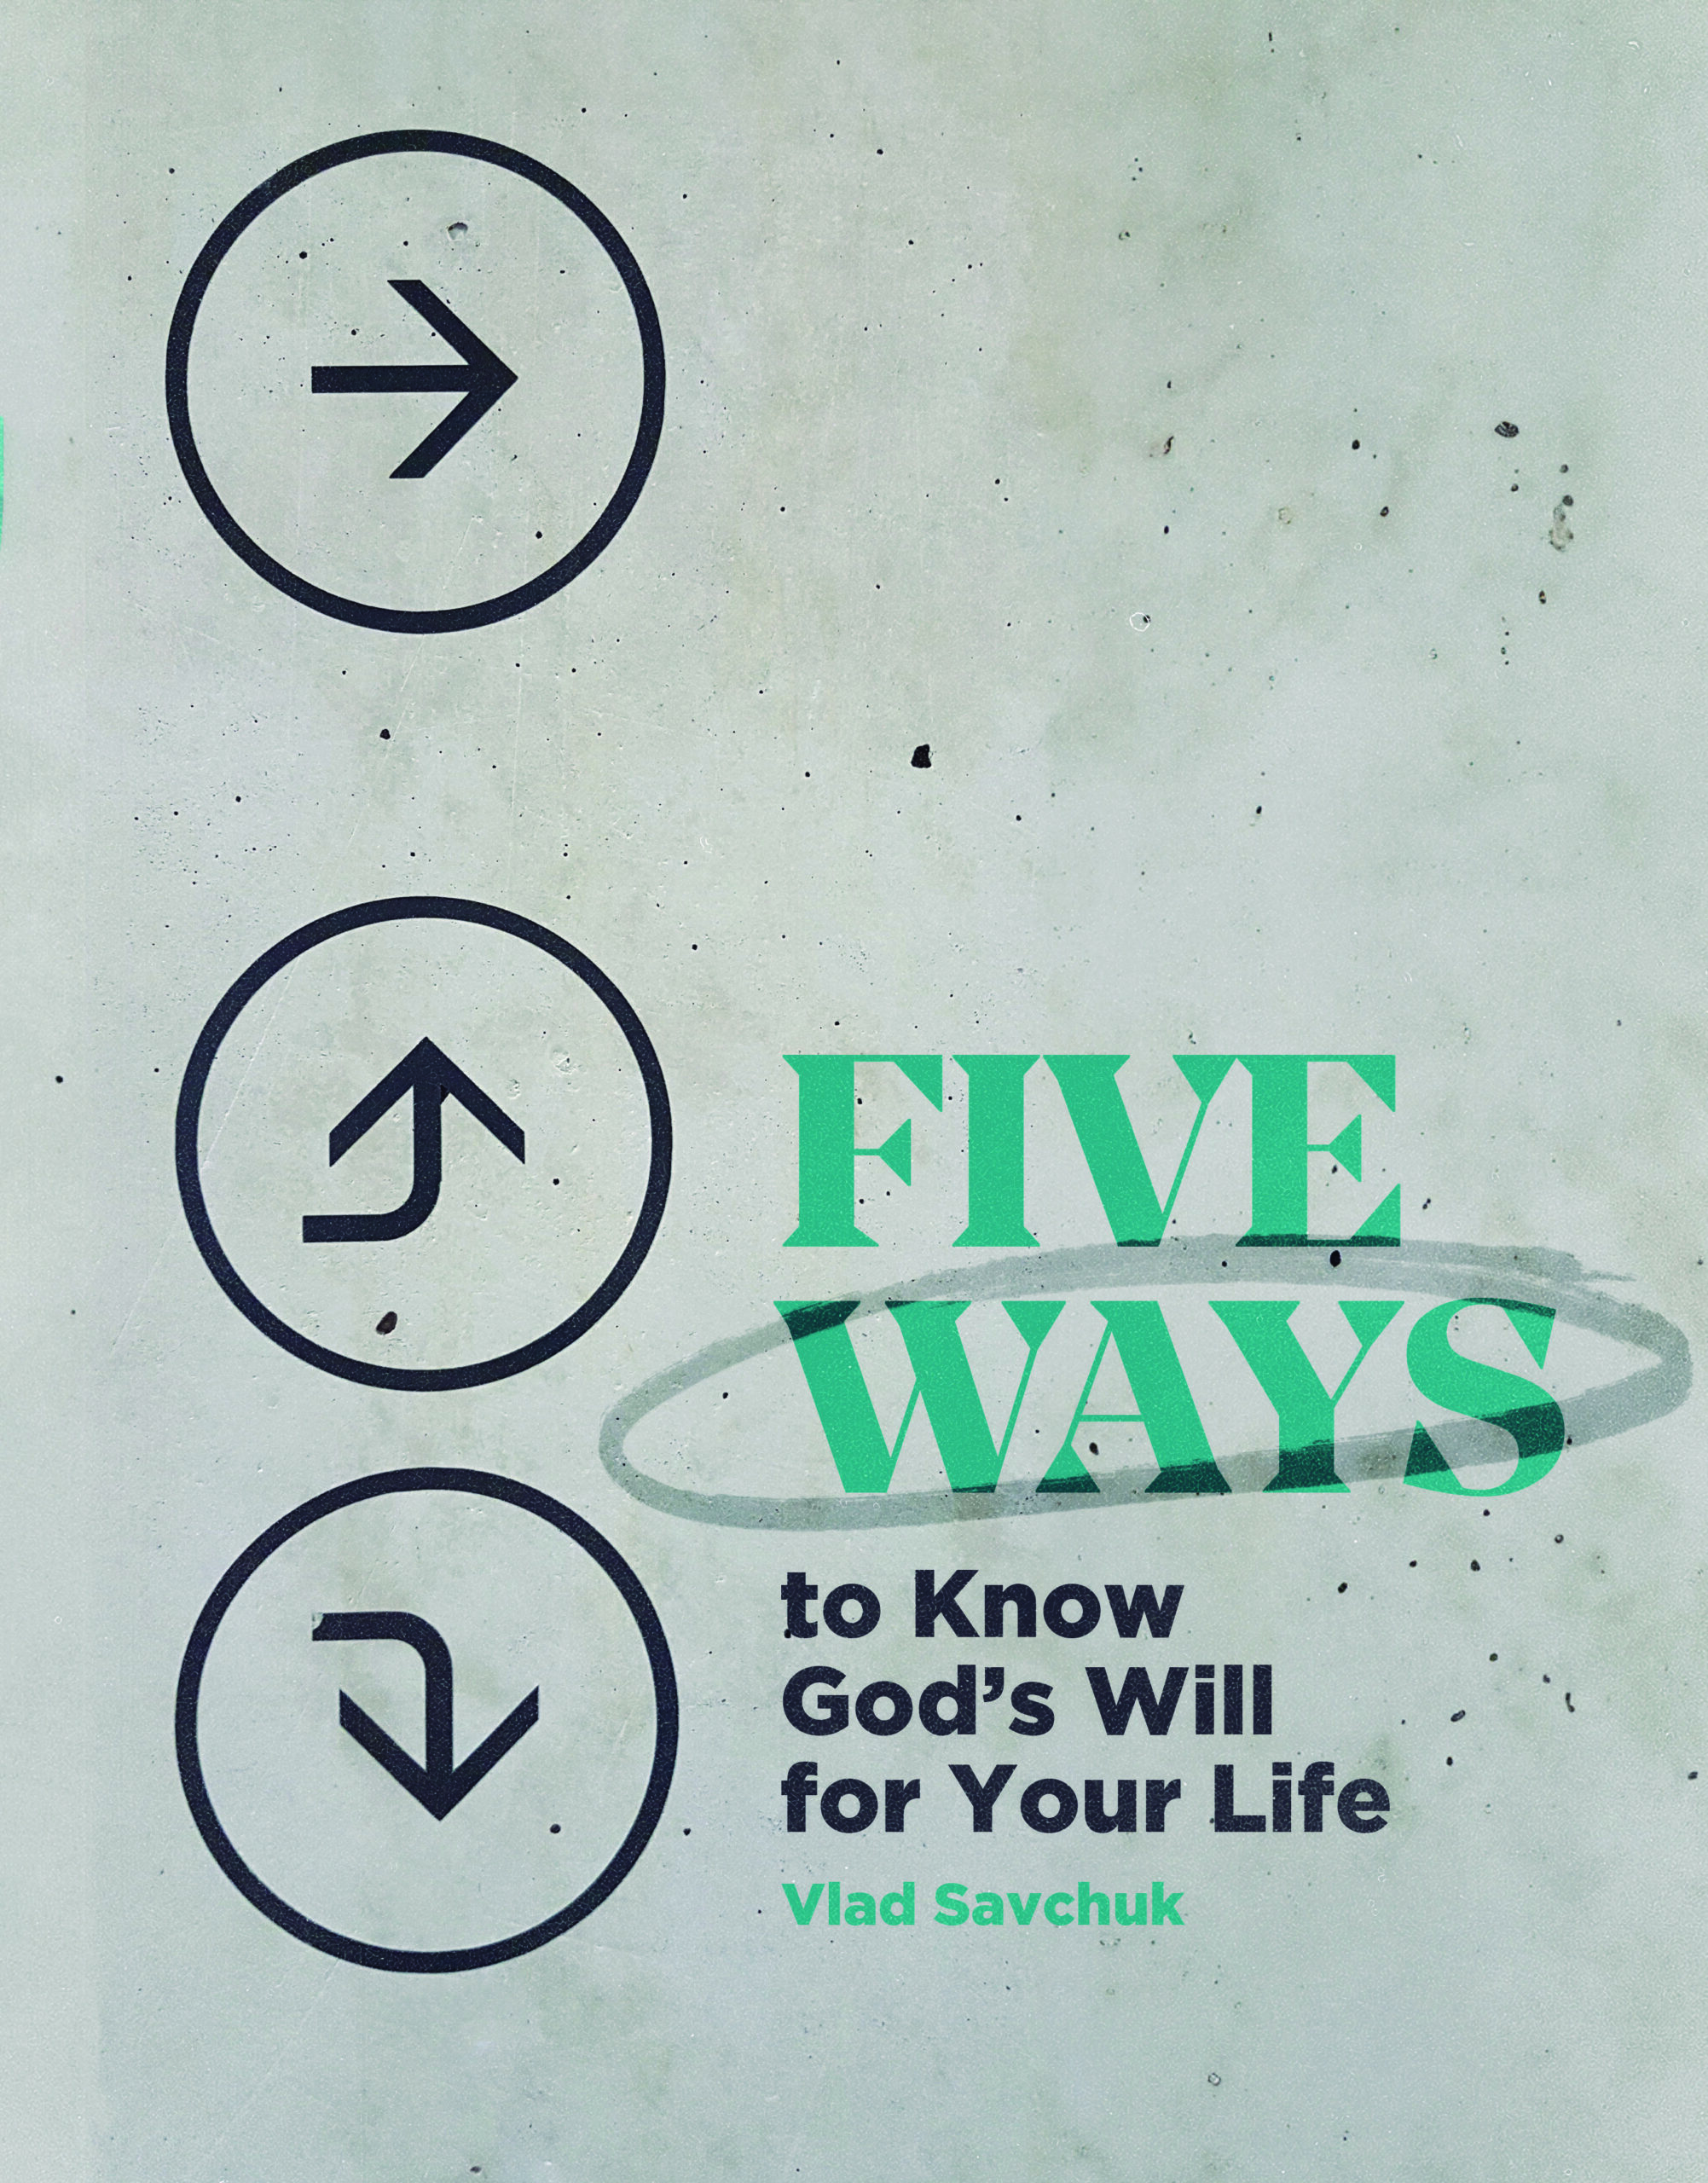 resource - 5 Ways to Know God’s Will for Your Life